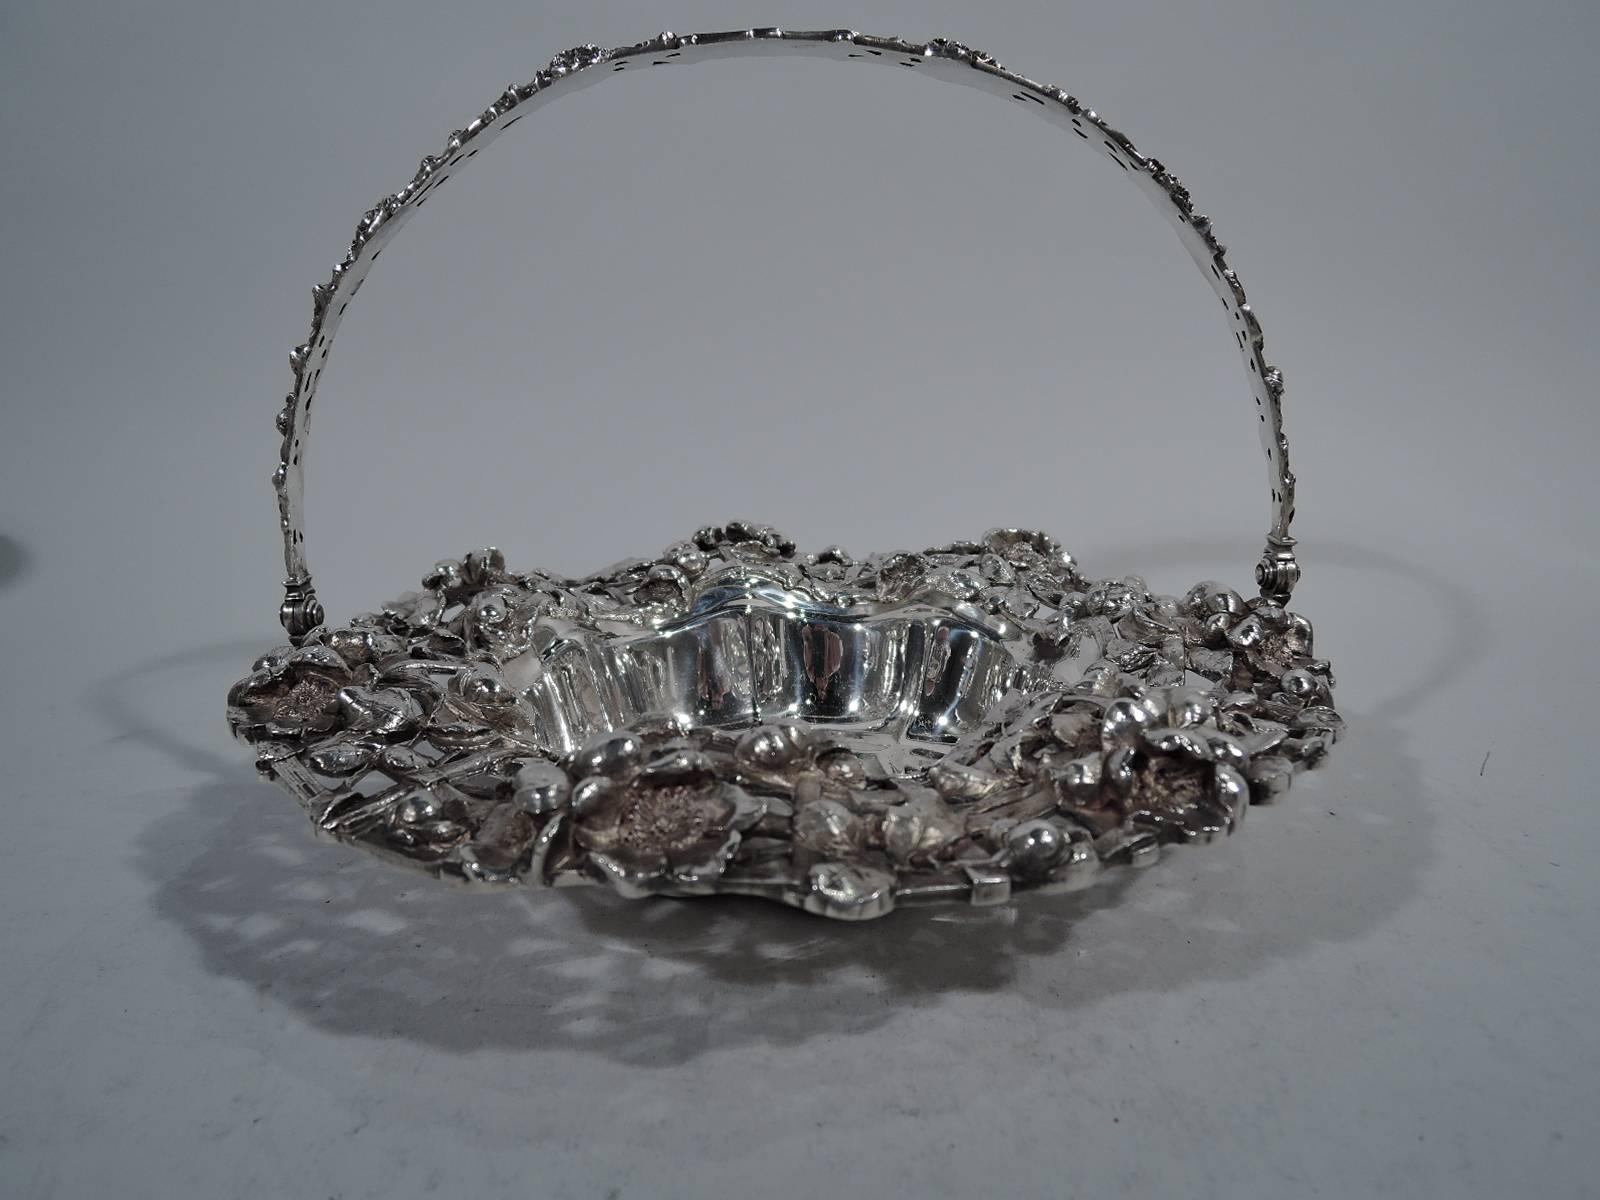 Art Nouveau sterling silver basket. Made by Dominick & Haff in New York in 1902. Plain scalloped well engraved with shaded monogram. Rim wide open trellis interwoven with flowers. C-scroll wing handle same with central oval frame (vacant). Pretty